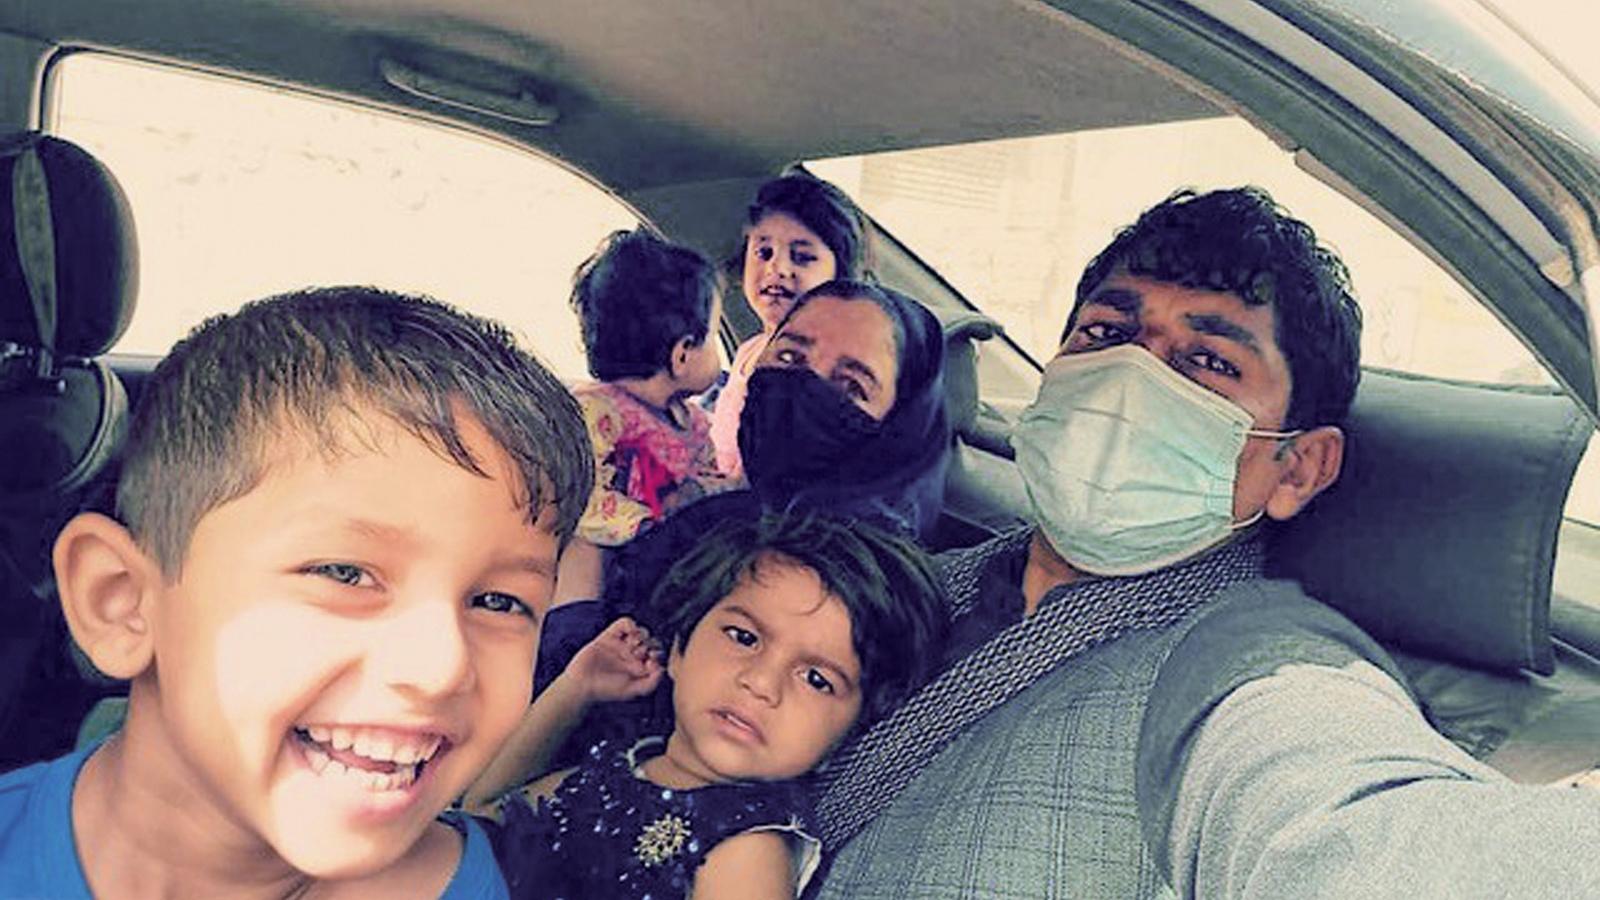 Zainullah Zaki and his family on Aug. 18, 2021, after they made it to Hamid Karzai International Airport to evacuate Afghanistan. (Courtesy of Zainullah Zaki)